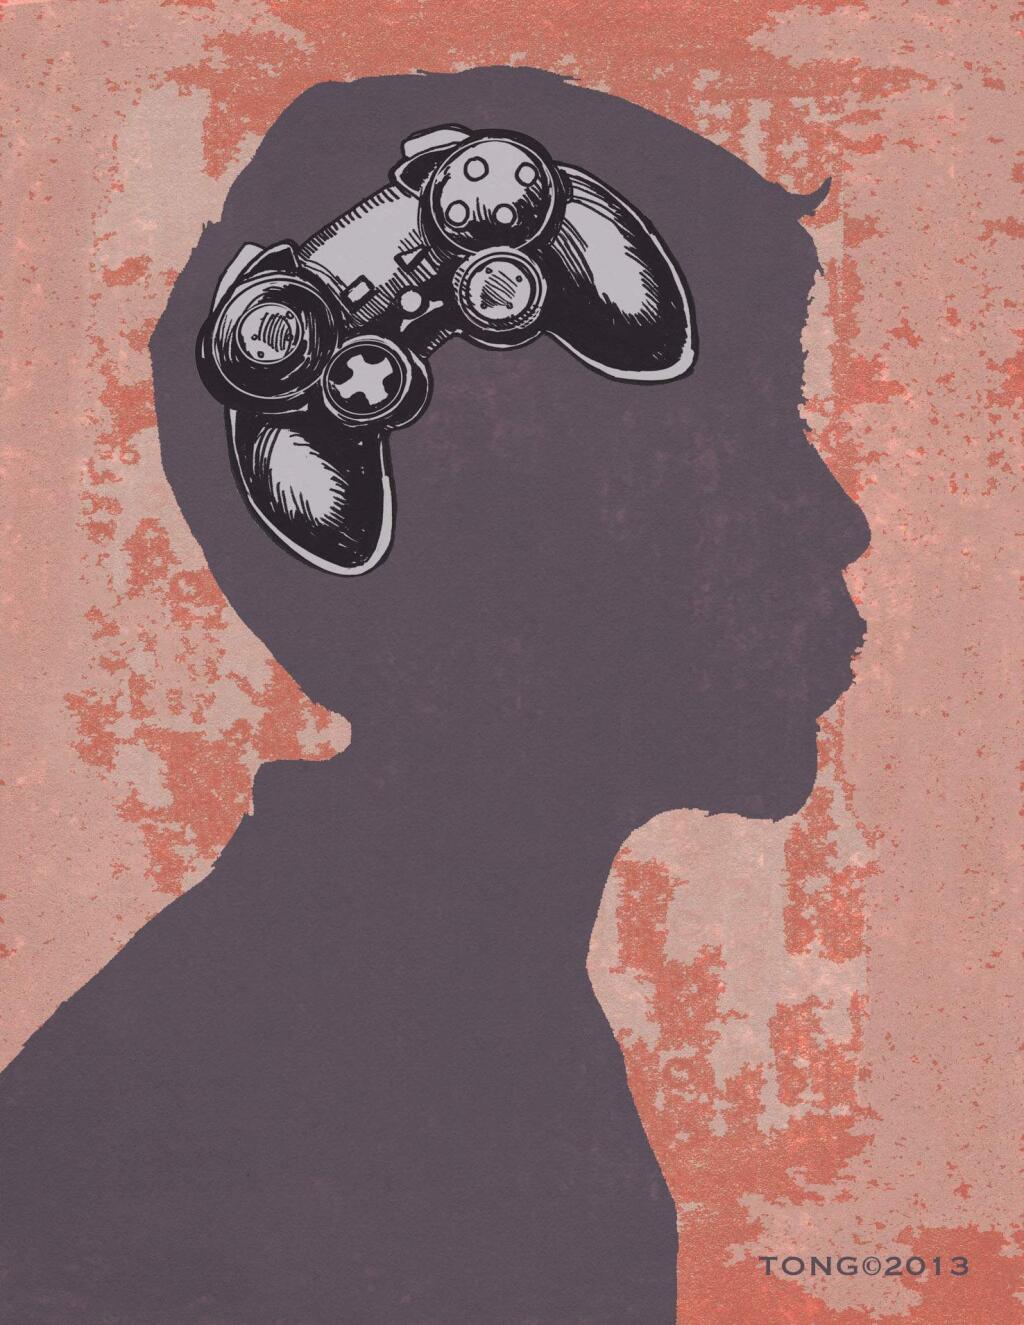 This artwork by Paul Tong relates to the effect of video games on childrens' brains.